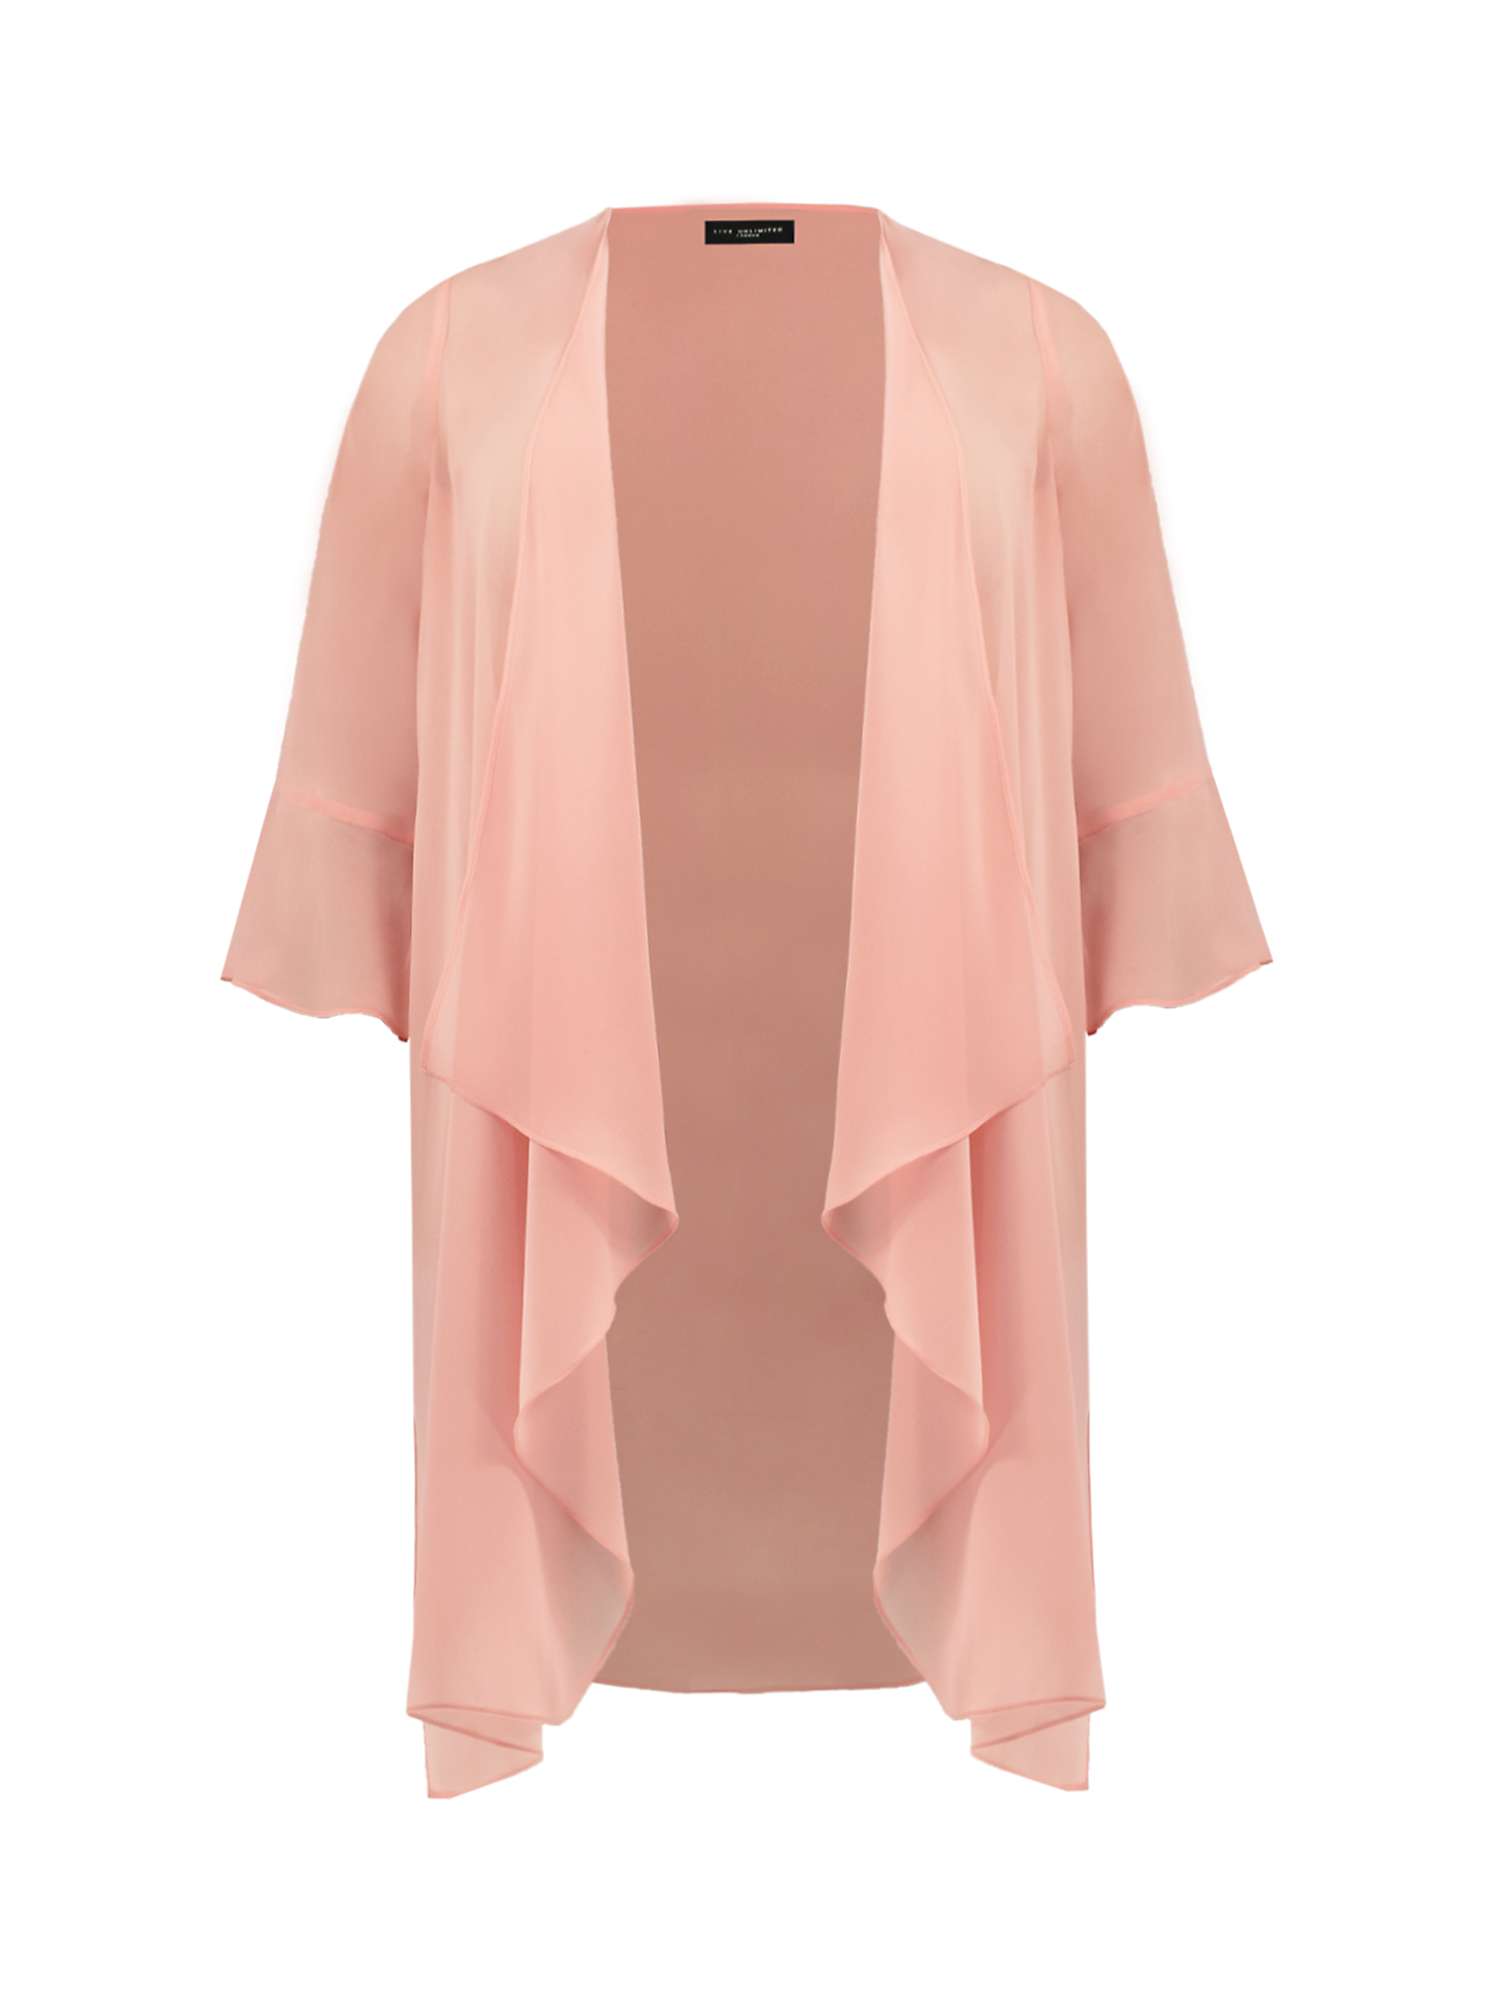 Buy Live Unlimited Waterfall Jacket Lace Dress Set,  Pink Online at johnlewis.com